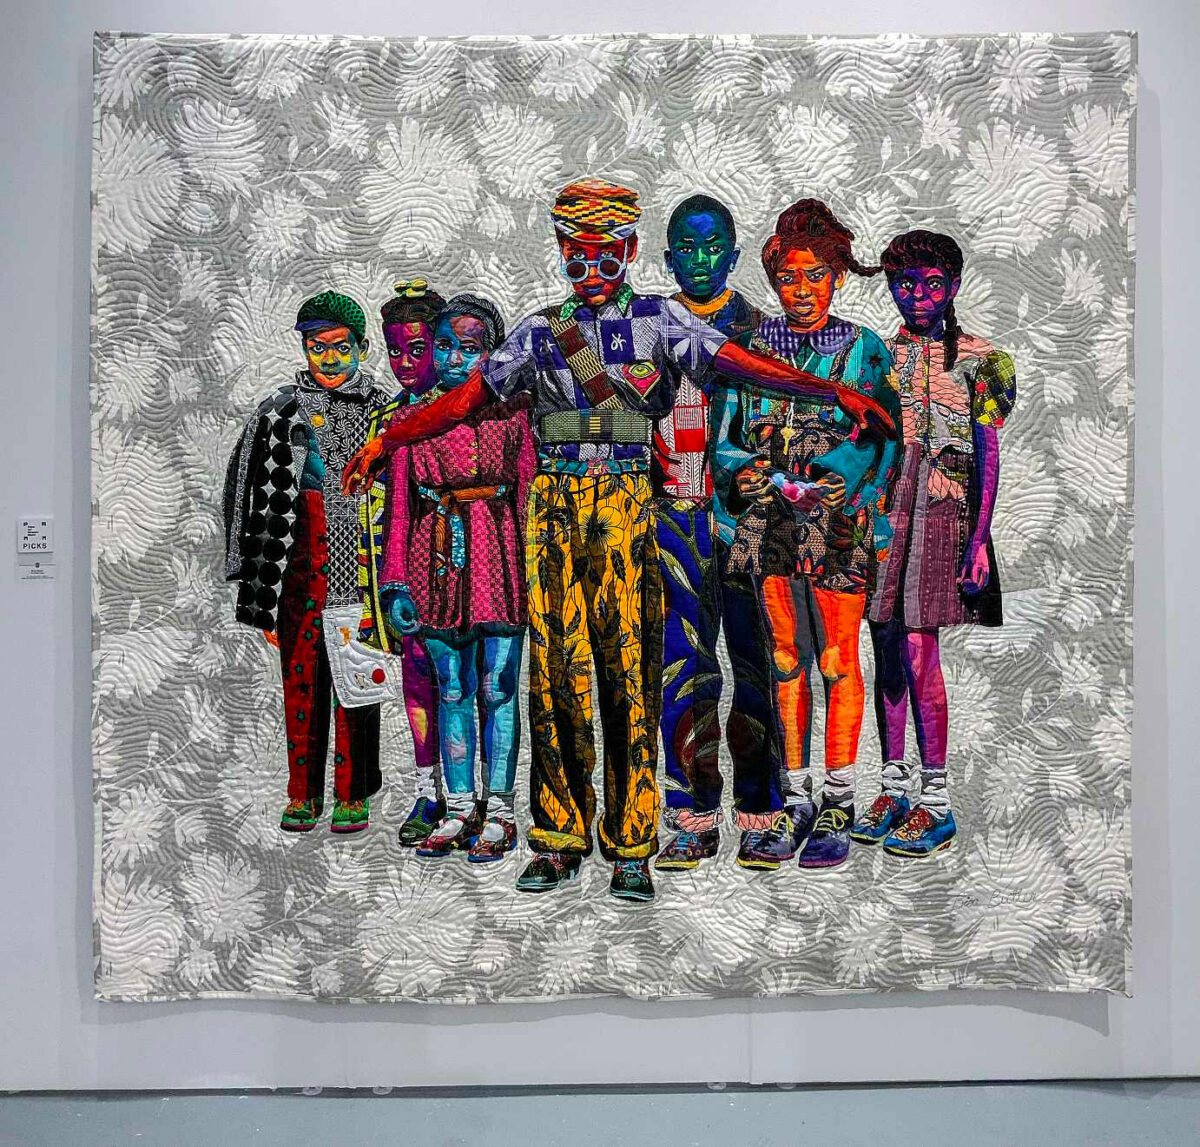 Vibrant Portraits Painted With Patterned Fabrics By Bisa Butler 5